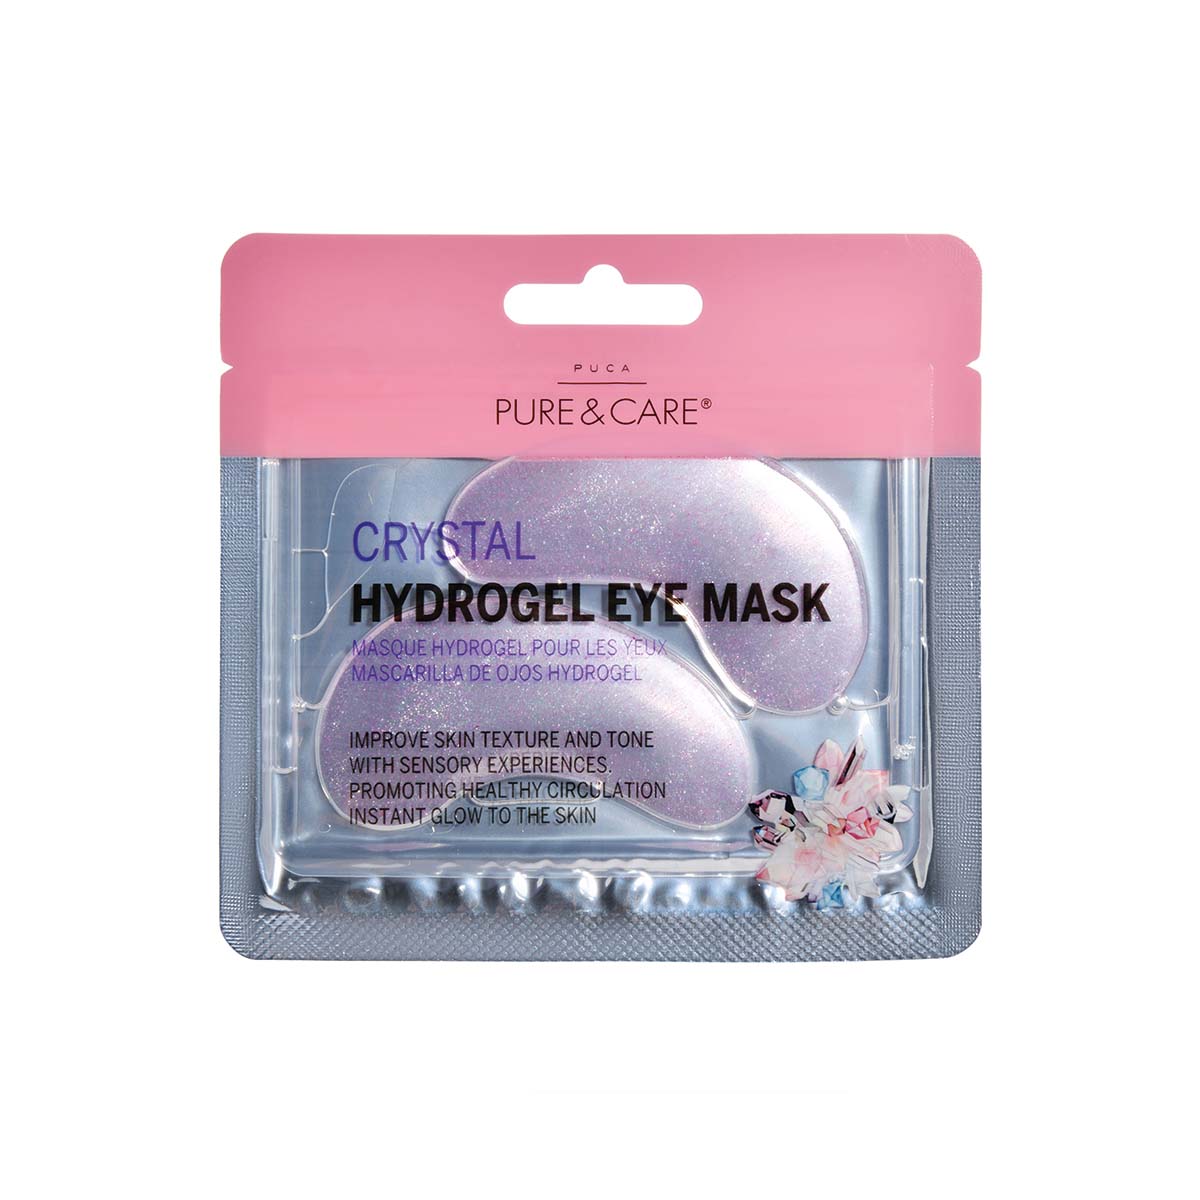 Crystal Hydrogel Eye Mask | PUCA - PURE & CARE